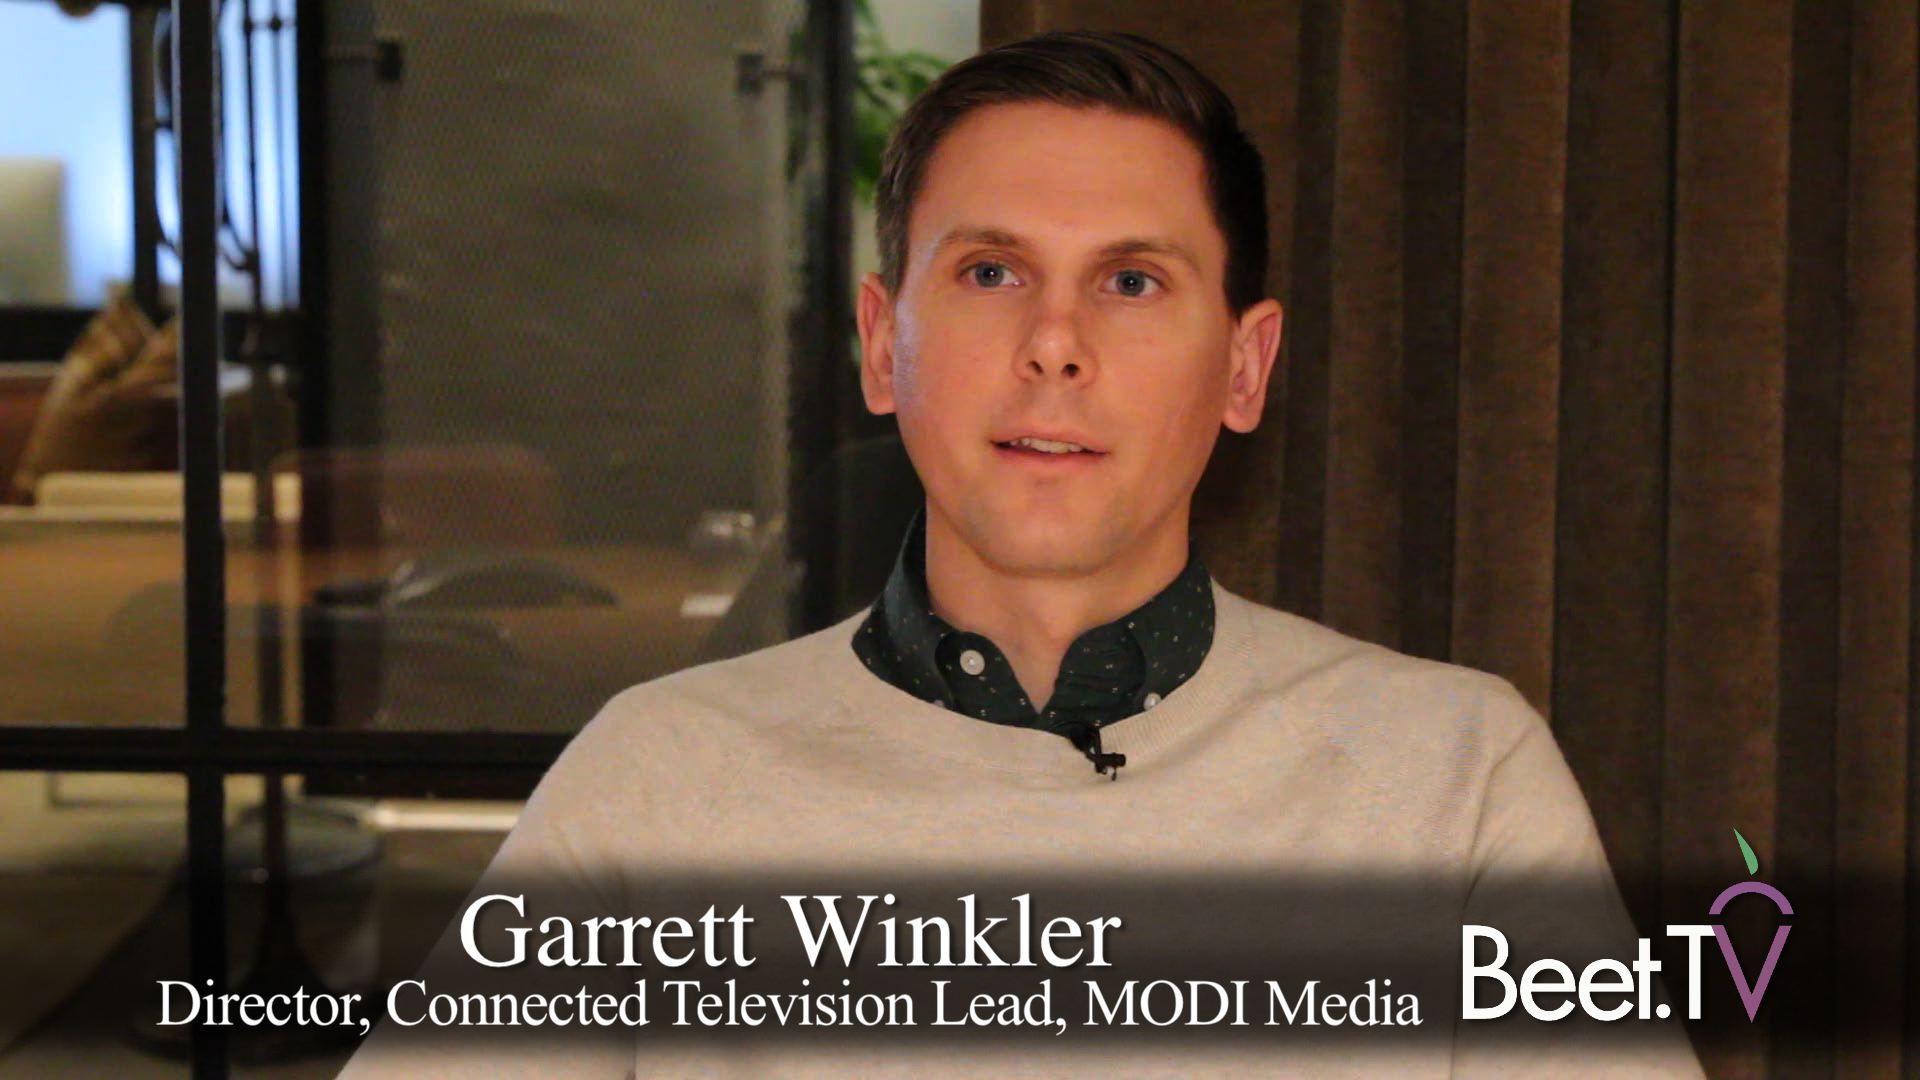 TV Viewing Gaps Require Layering On A Multitude Of Data: MODI’s Winkler